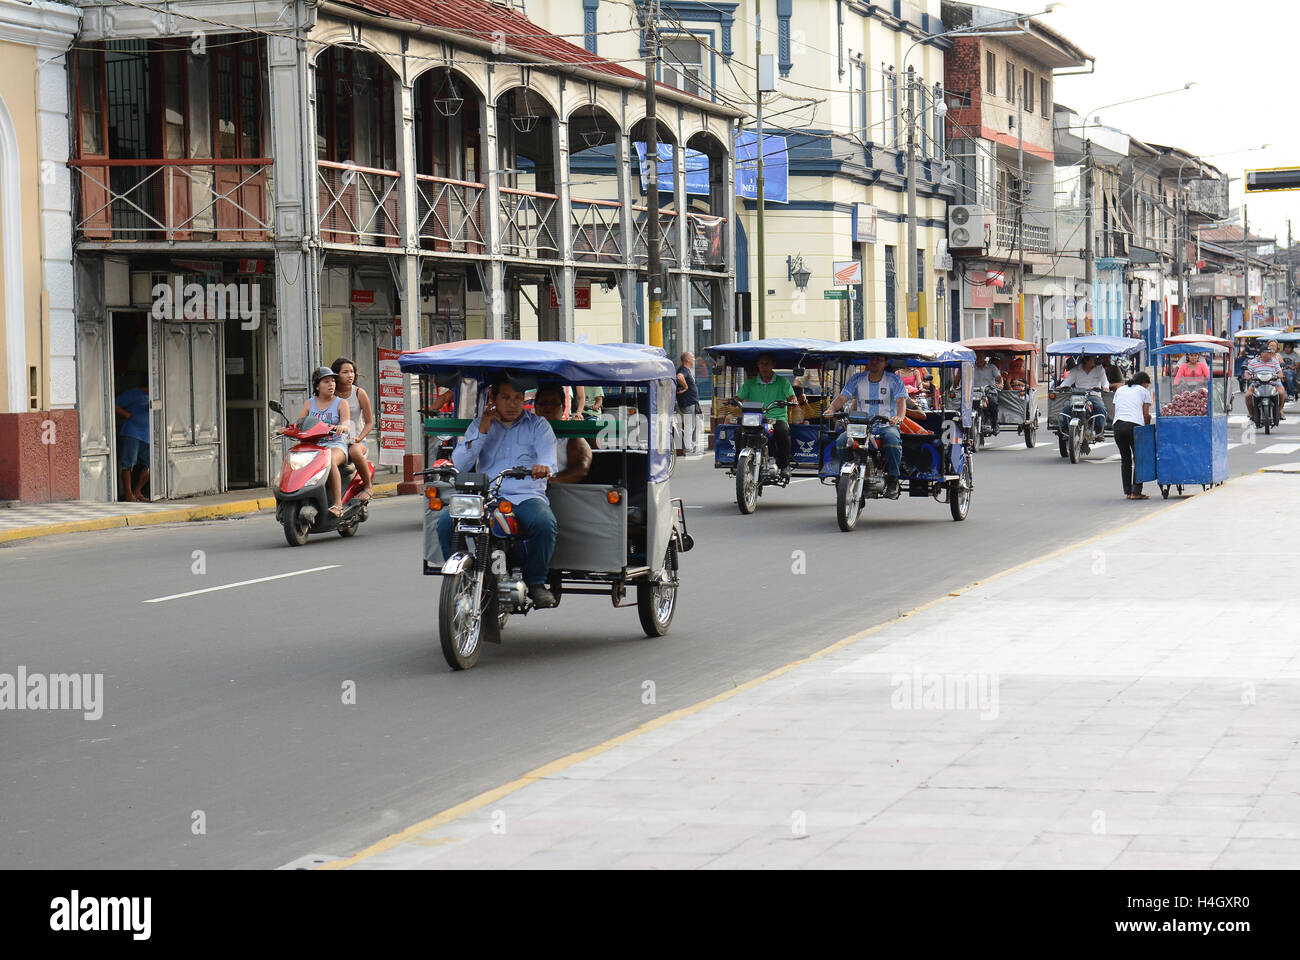 IQUITOS, PERU - OCTOBER 17, 2015: MotoKar on Iquitos street.  MotoKars are the most common form of street transportation in the Stock Photo